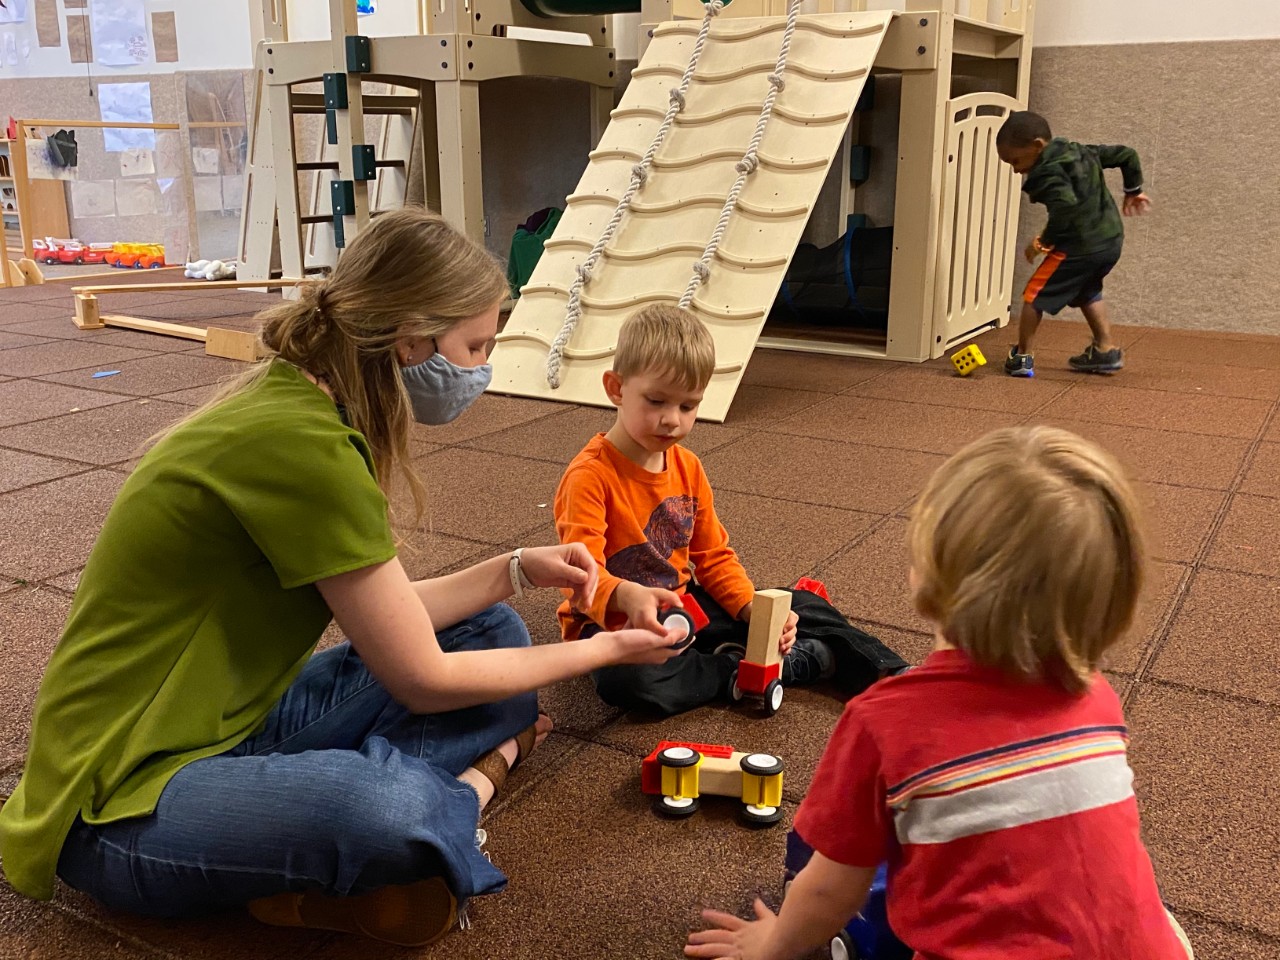 Hanna Berwanger, CECH '15, '20, works in the Phyllis Goldsmith Levinson Playroom at the Arlitt Center, an indoor gross-motor play space affectionately dubbed the "muscle room."